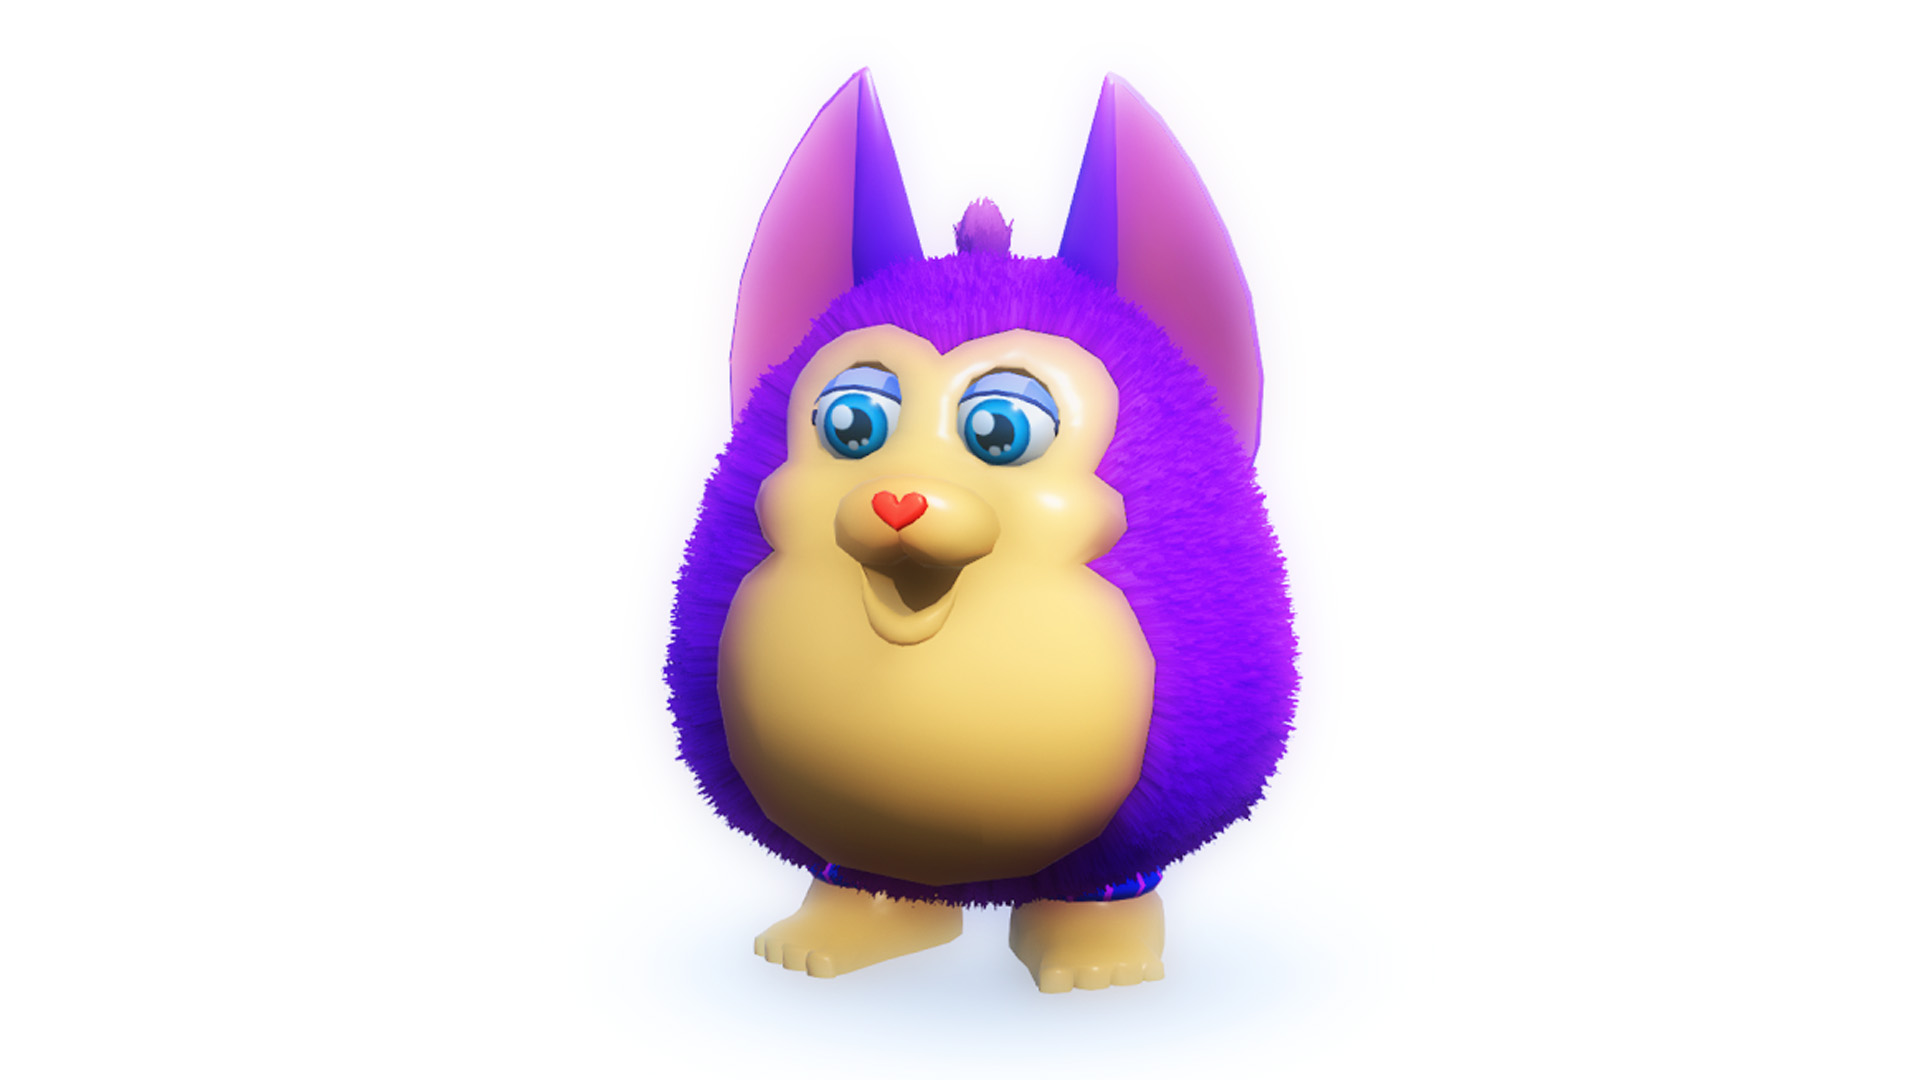 Tattletail mobile three fan games for fun number 1 where is mama?/Tattletail  is harder then Original 